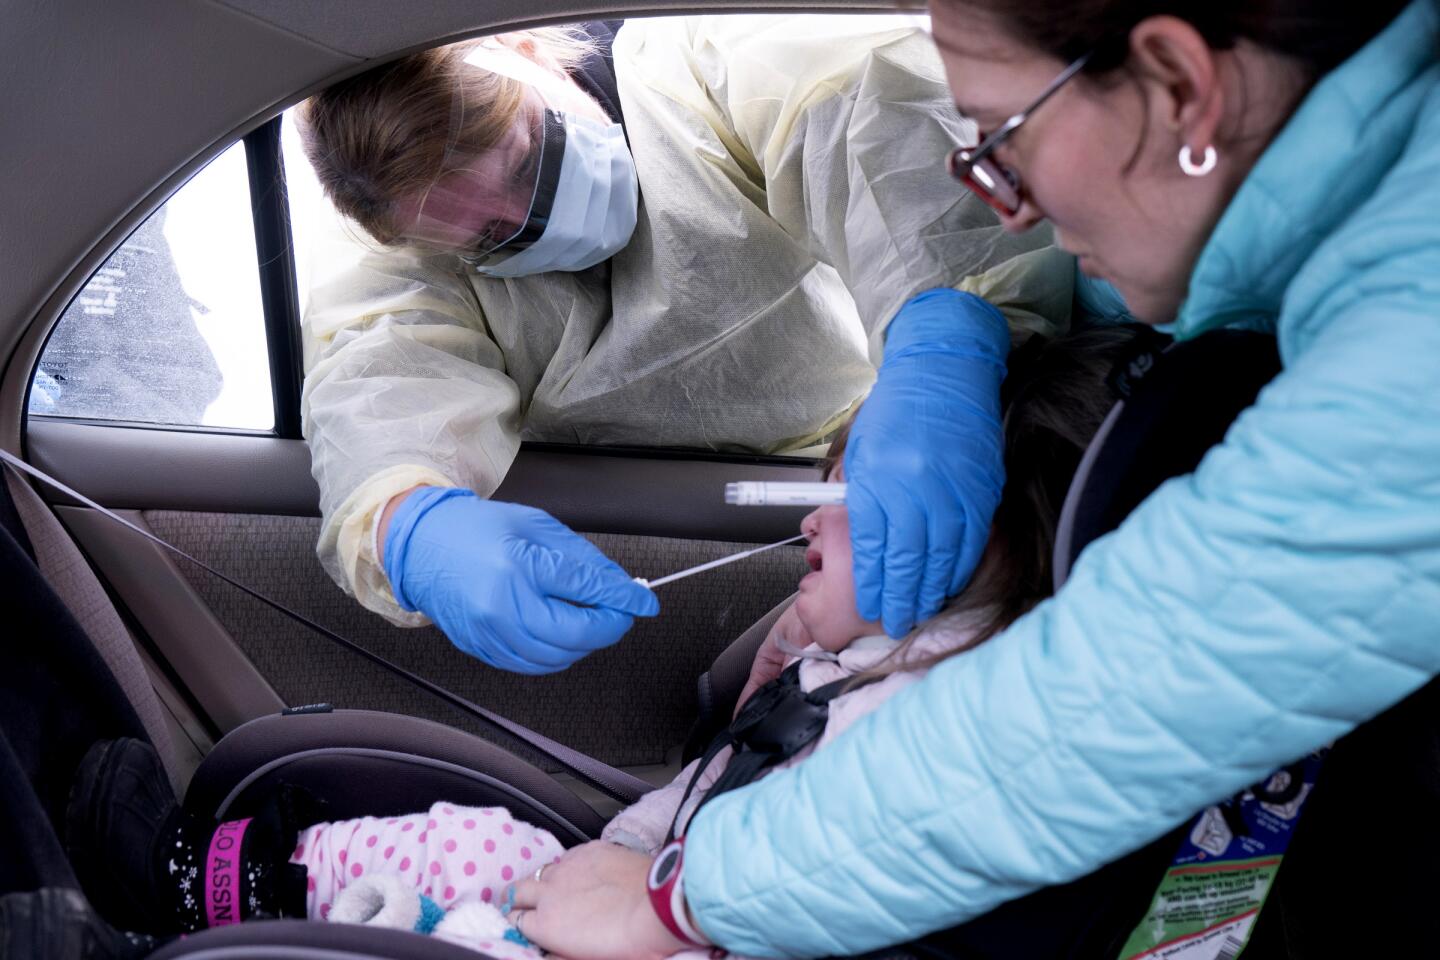 Canada: A medical professional collects a sample from a young girl at a drive-through coronavirus screening clinic in Montreal.